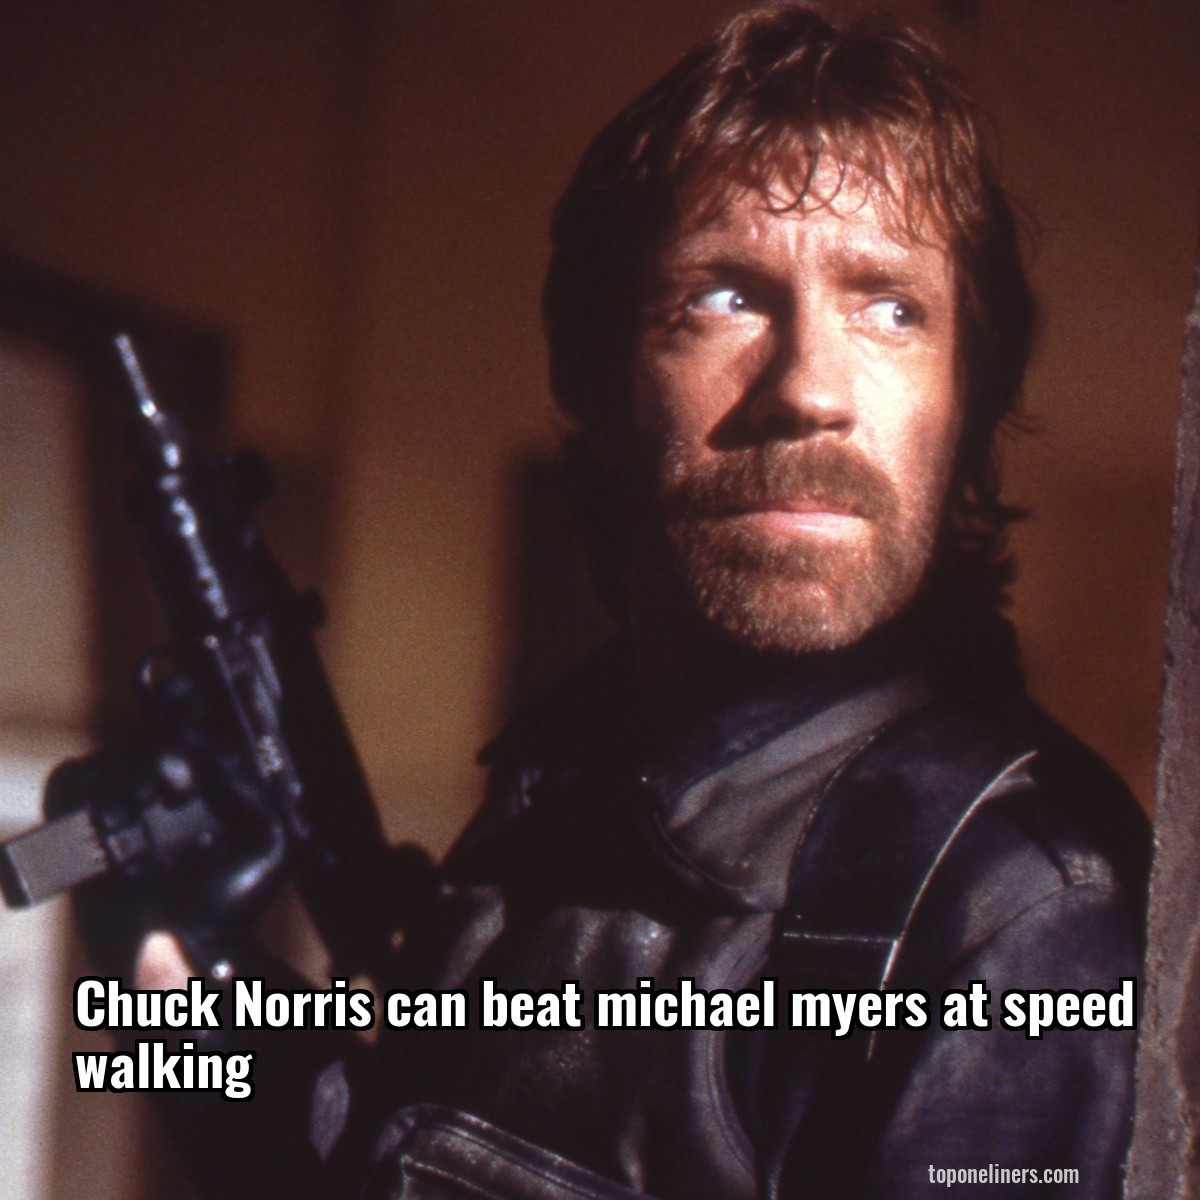 Chuck Norris can beat michael myers at speed walking